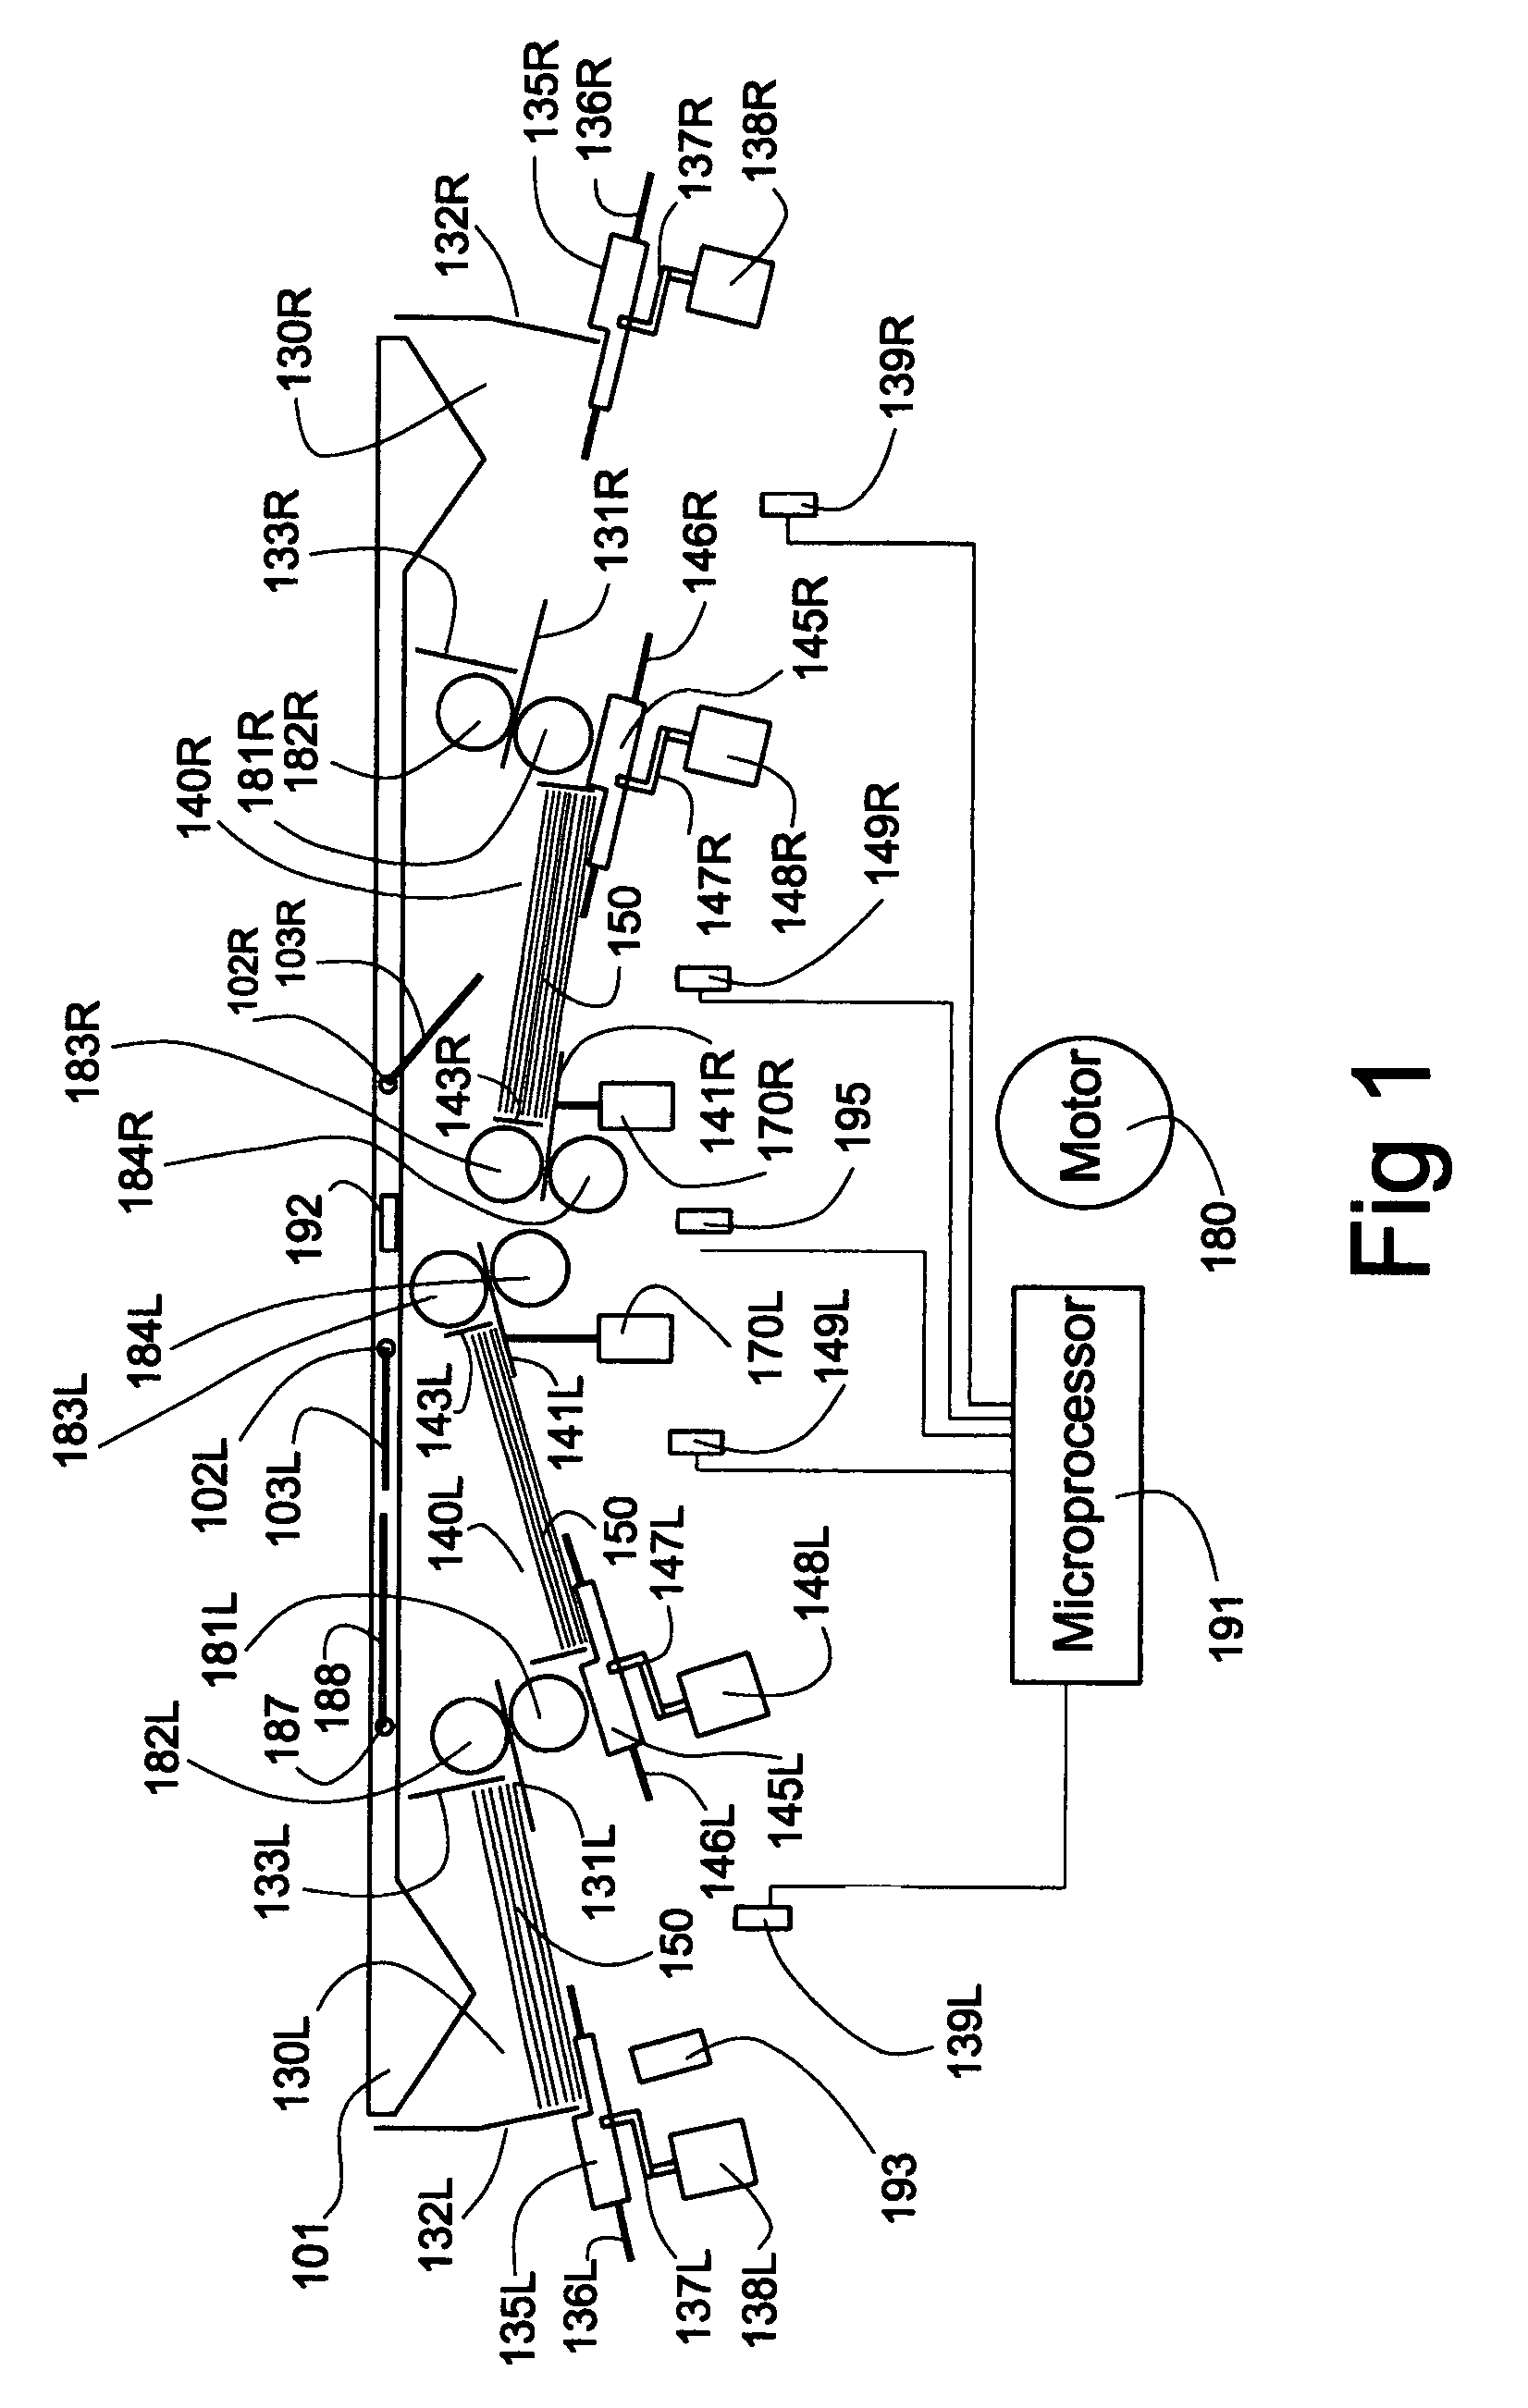 Method and apparatus for shuffling and ordering playing cards